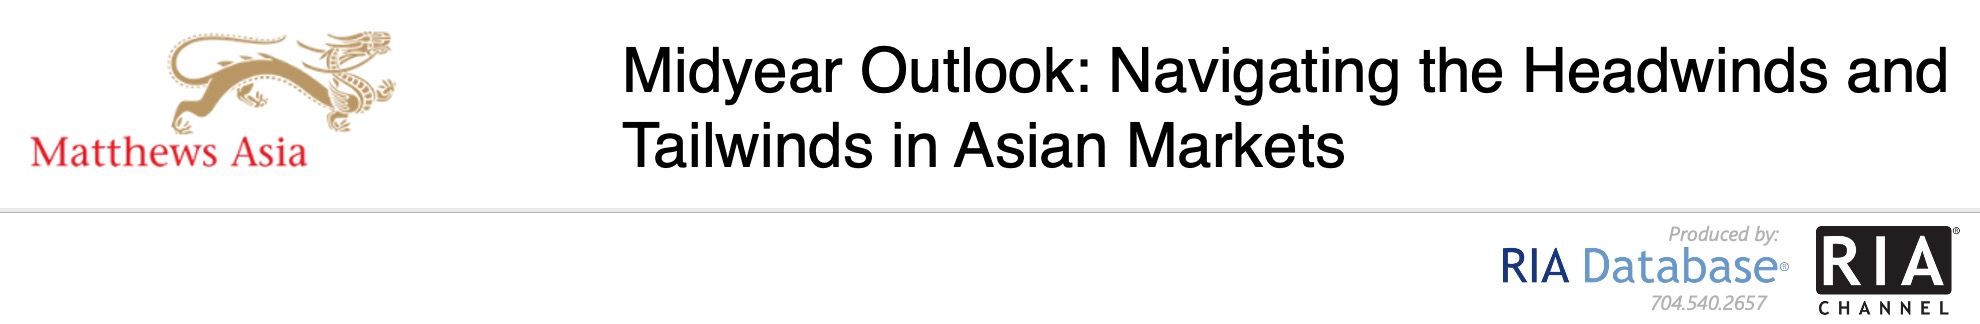 Midyear Outlook: Navigating the Headwinds and Tailwinds in Asian Markets